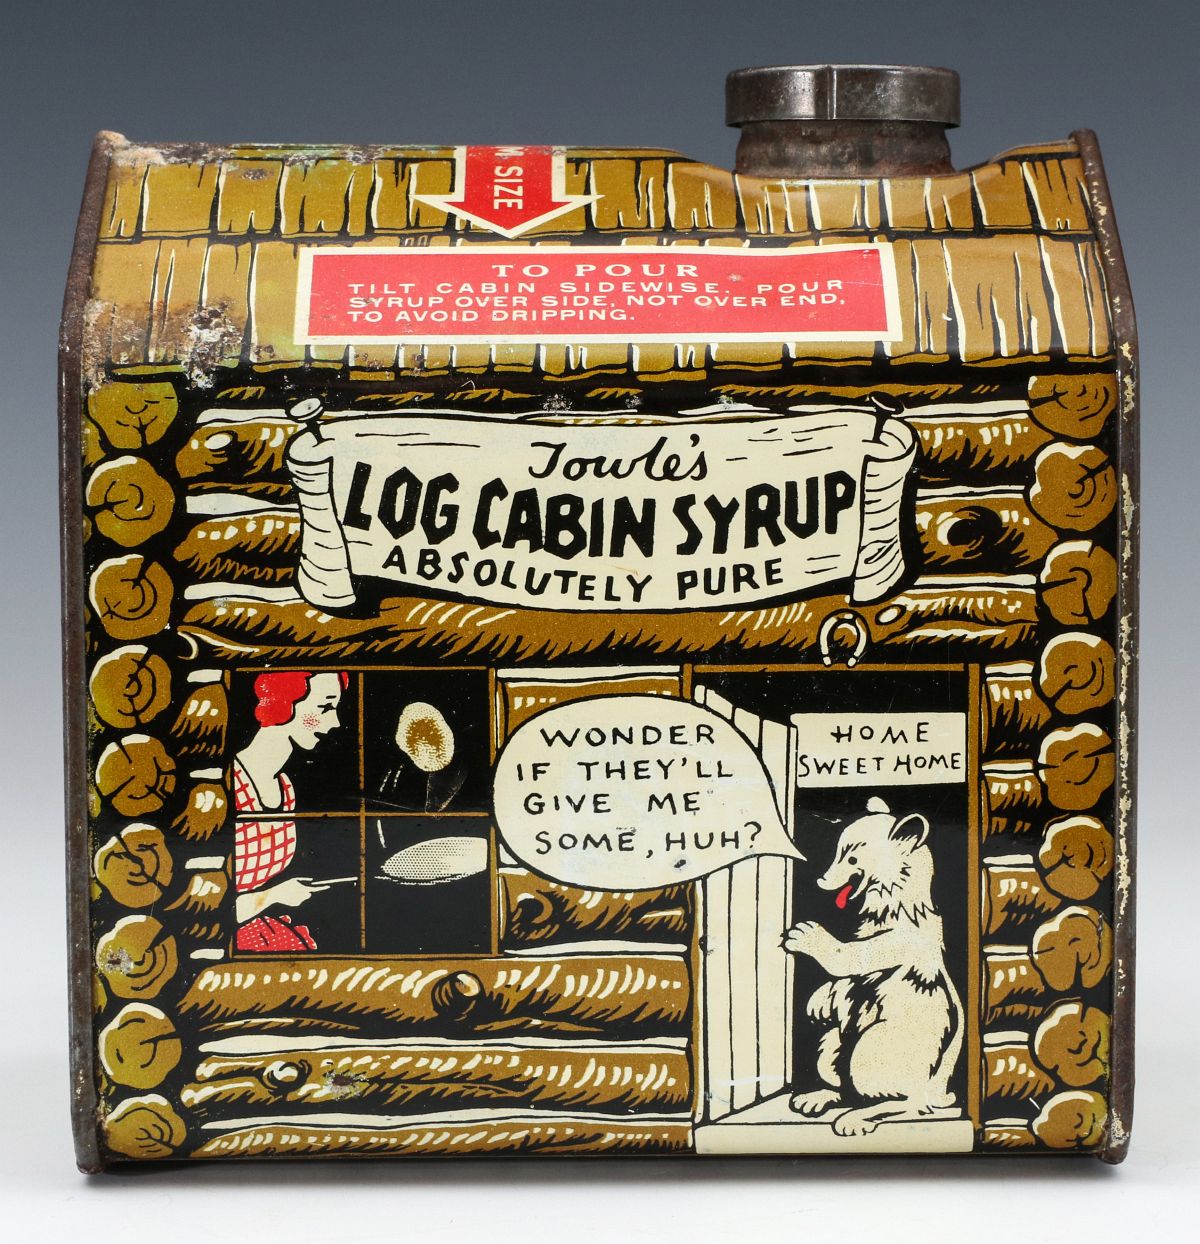 A TOWLE'S LOG CABIN TWO POUND SYRUP TIN